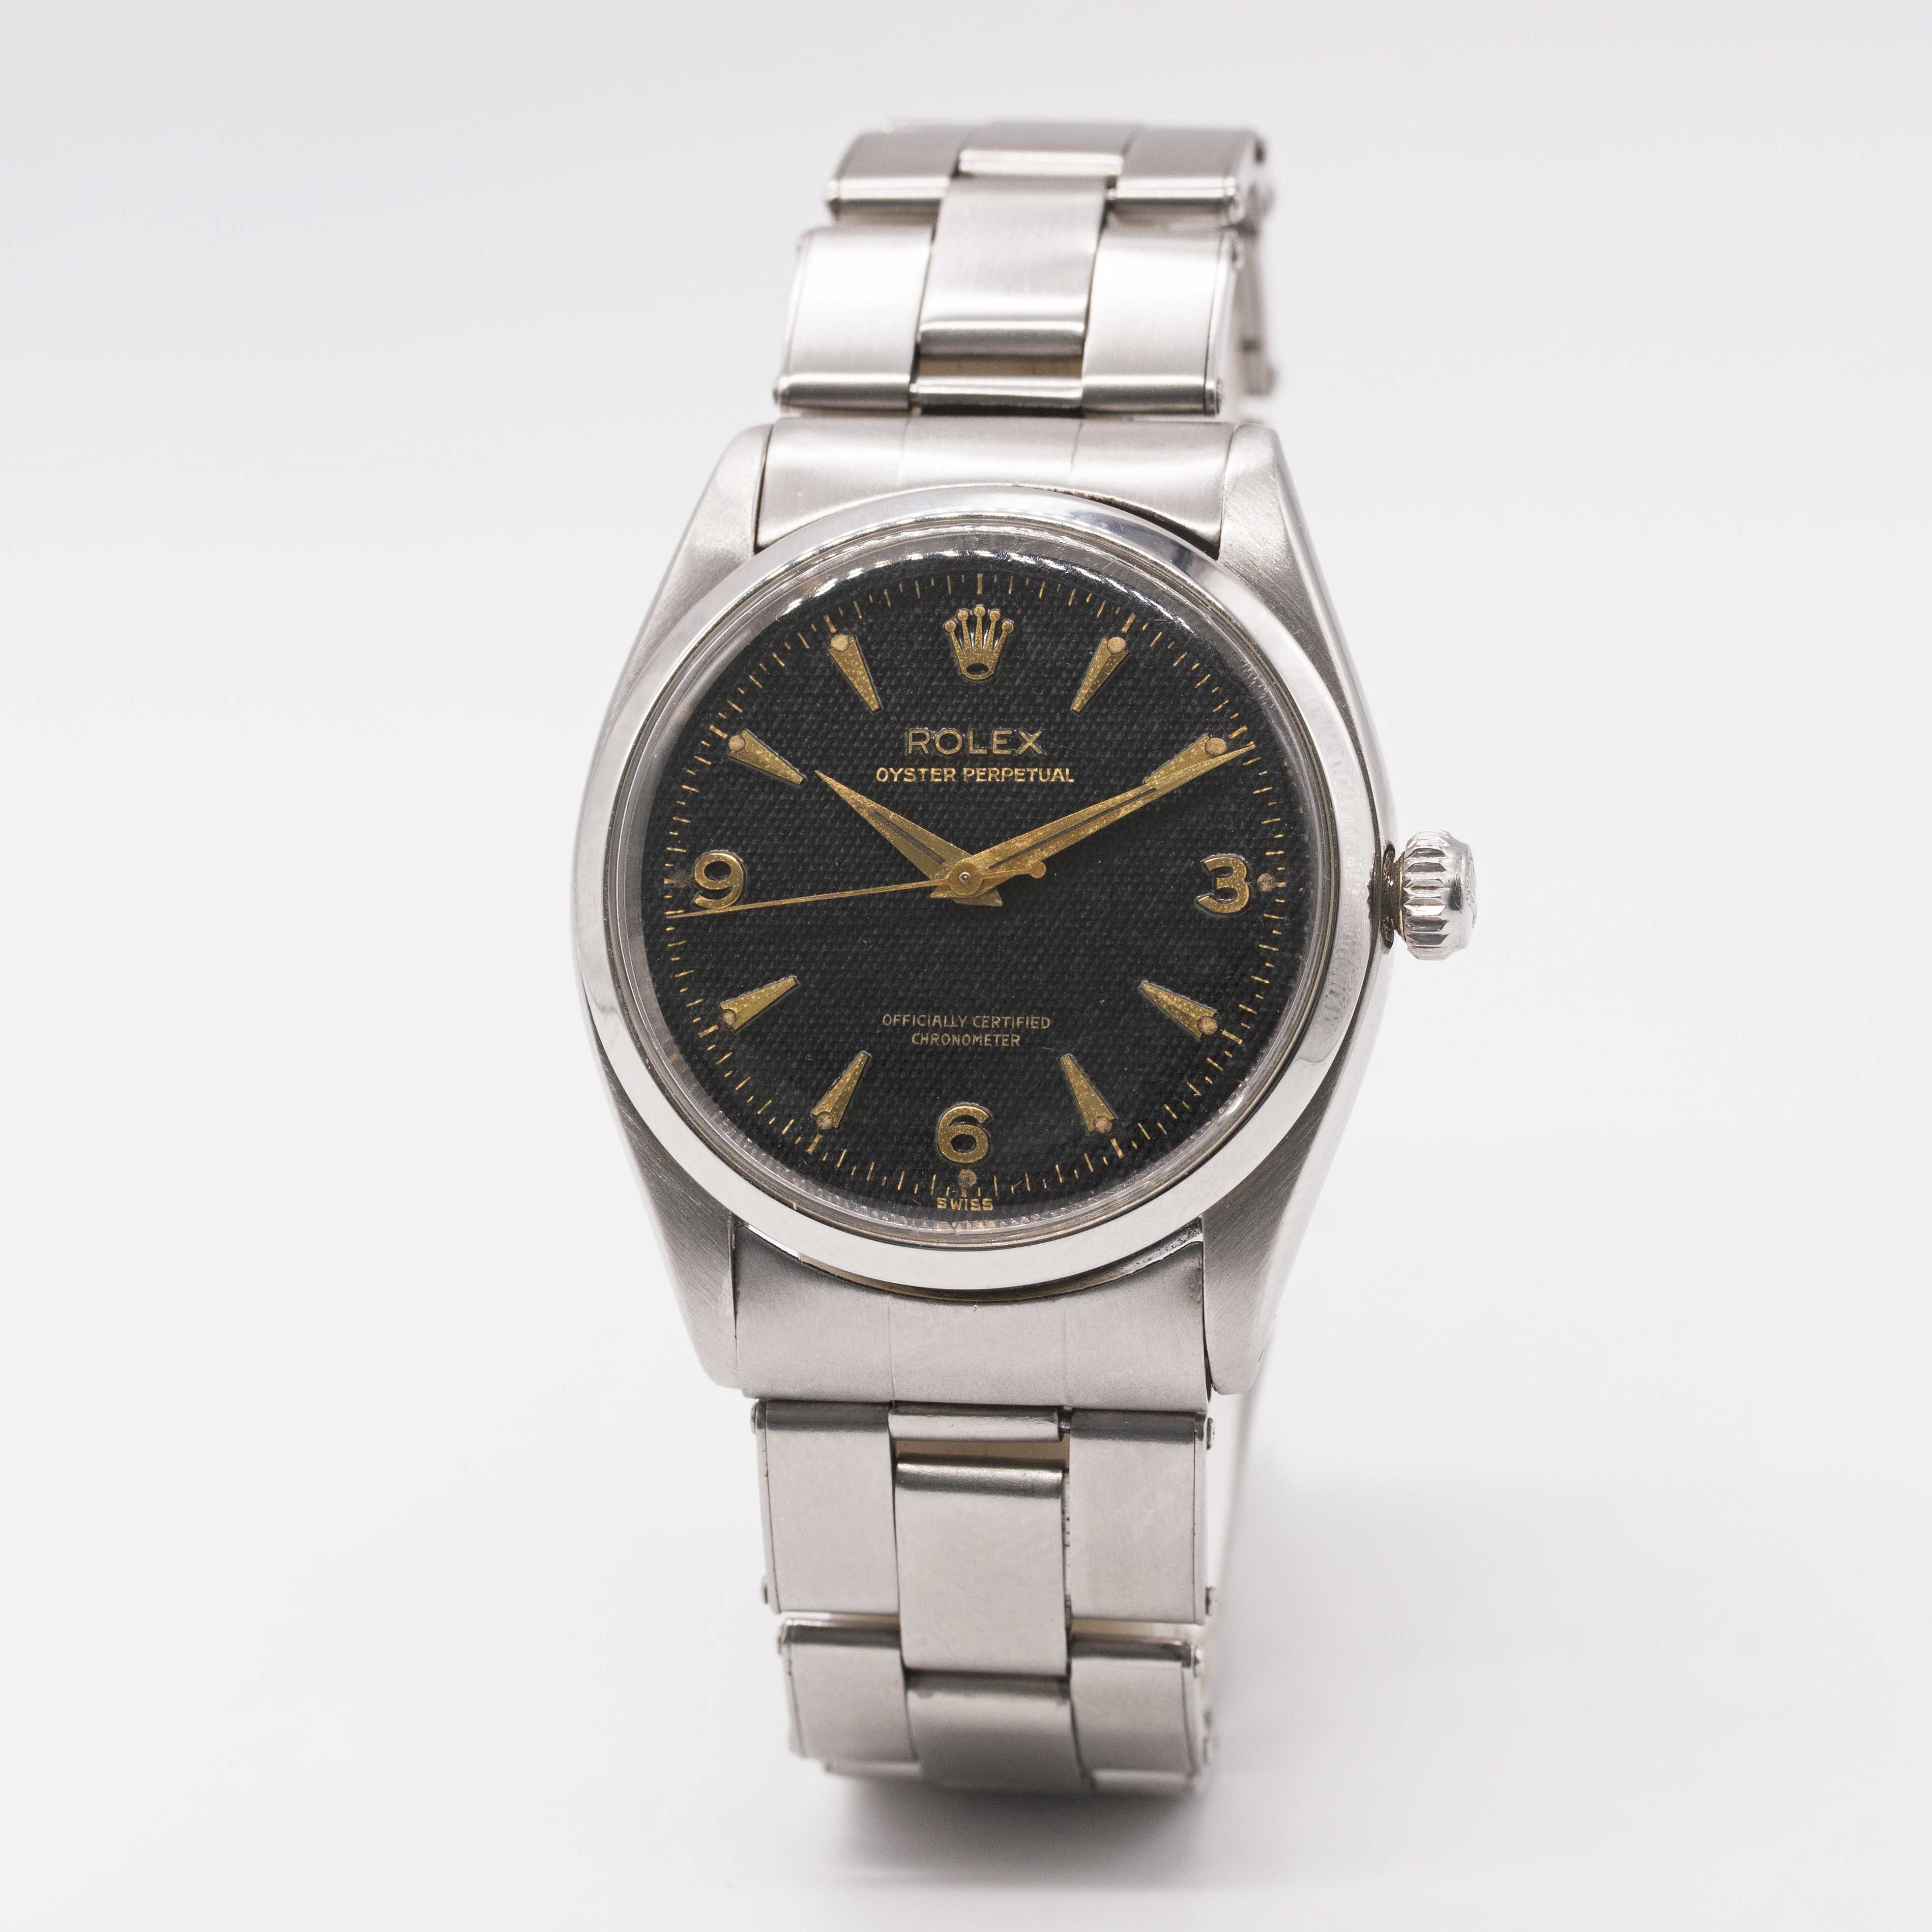 A RARE GENTLEMAN'S STAINLESS STEEL ROLEX OYSTER PERPETUAL BRACELET WATCH CIRCA 1956, REF. 6564 - Image 5 of 12